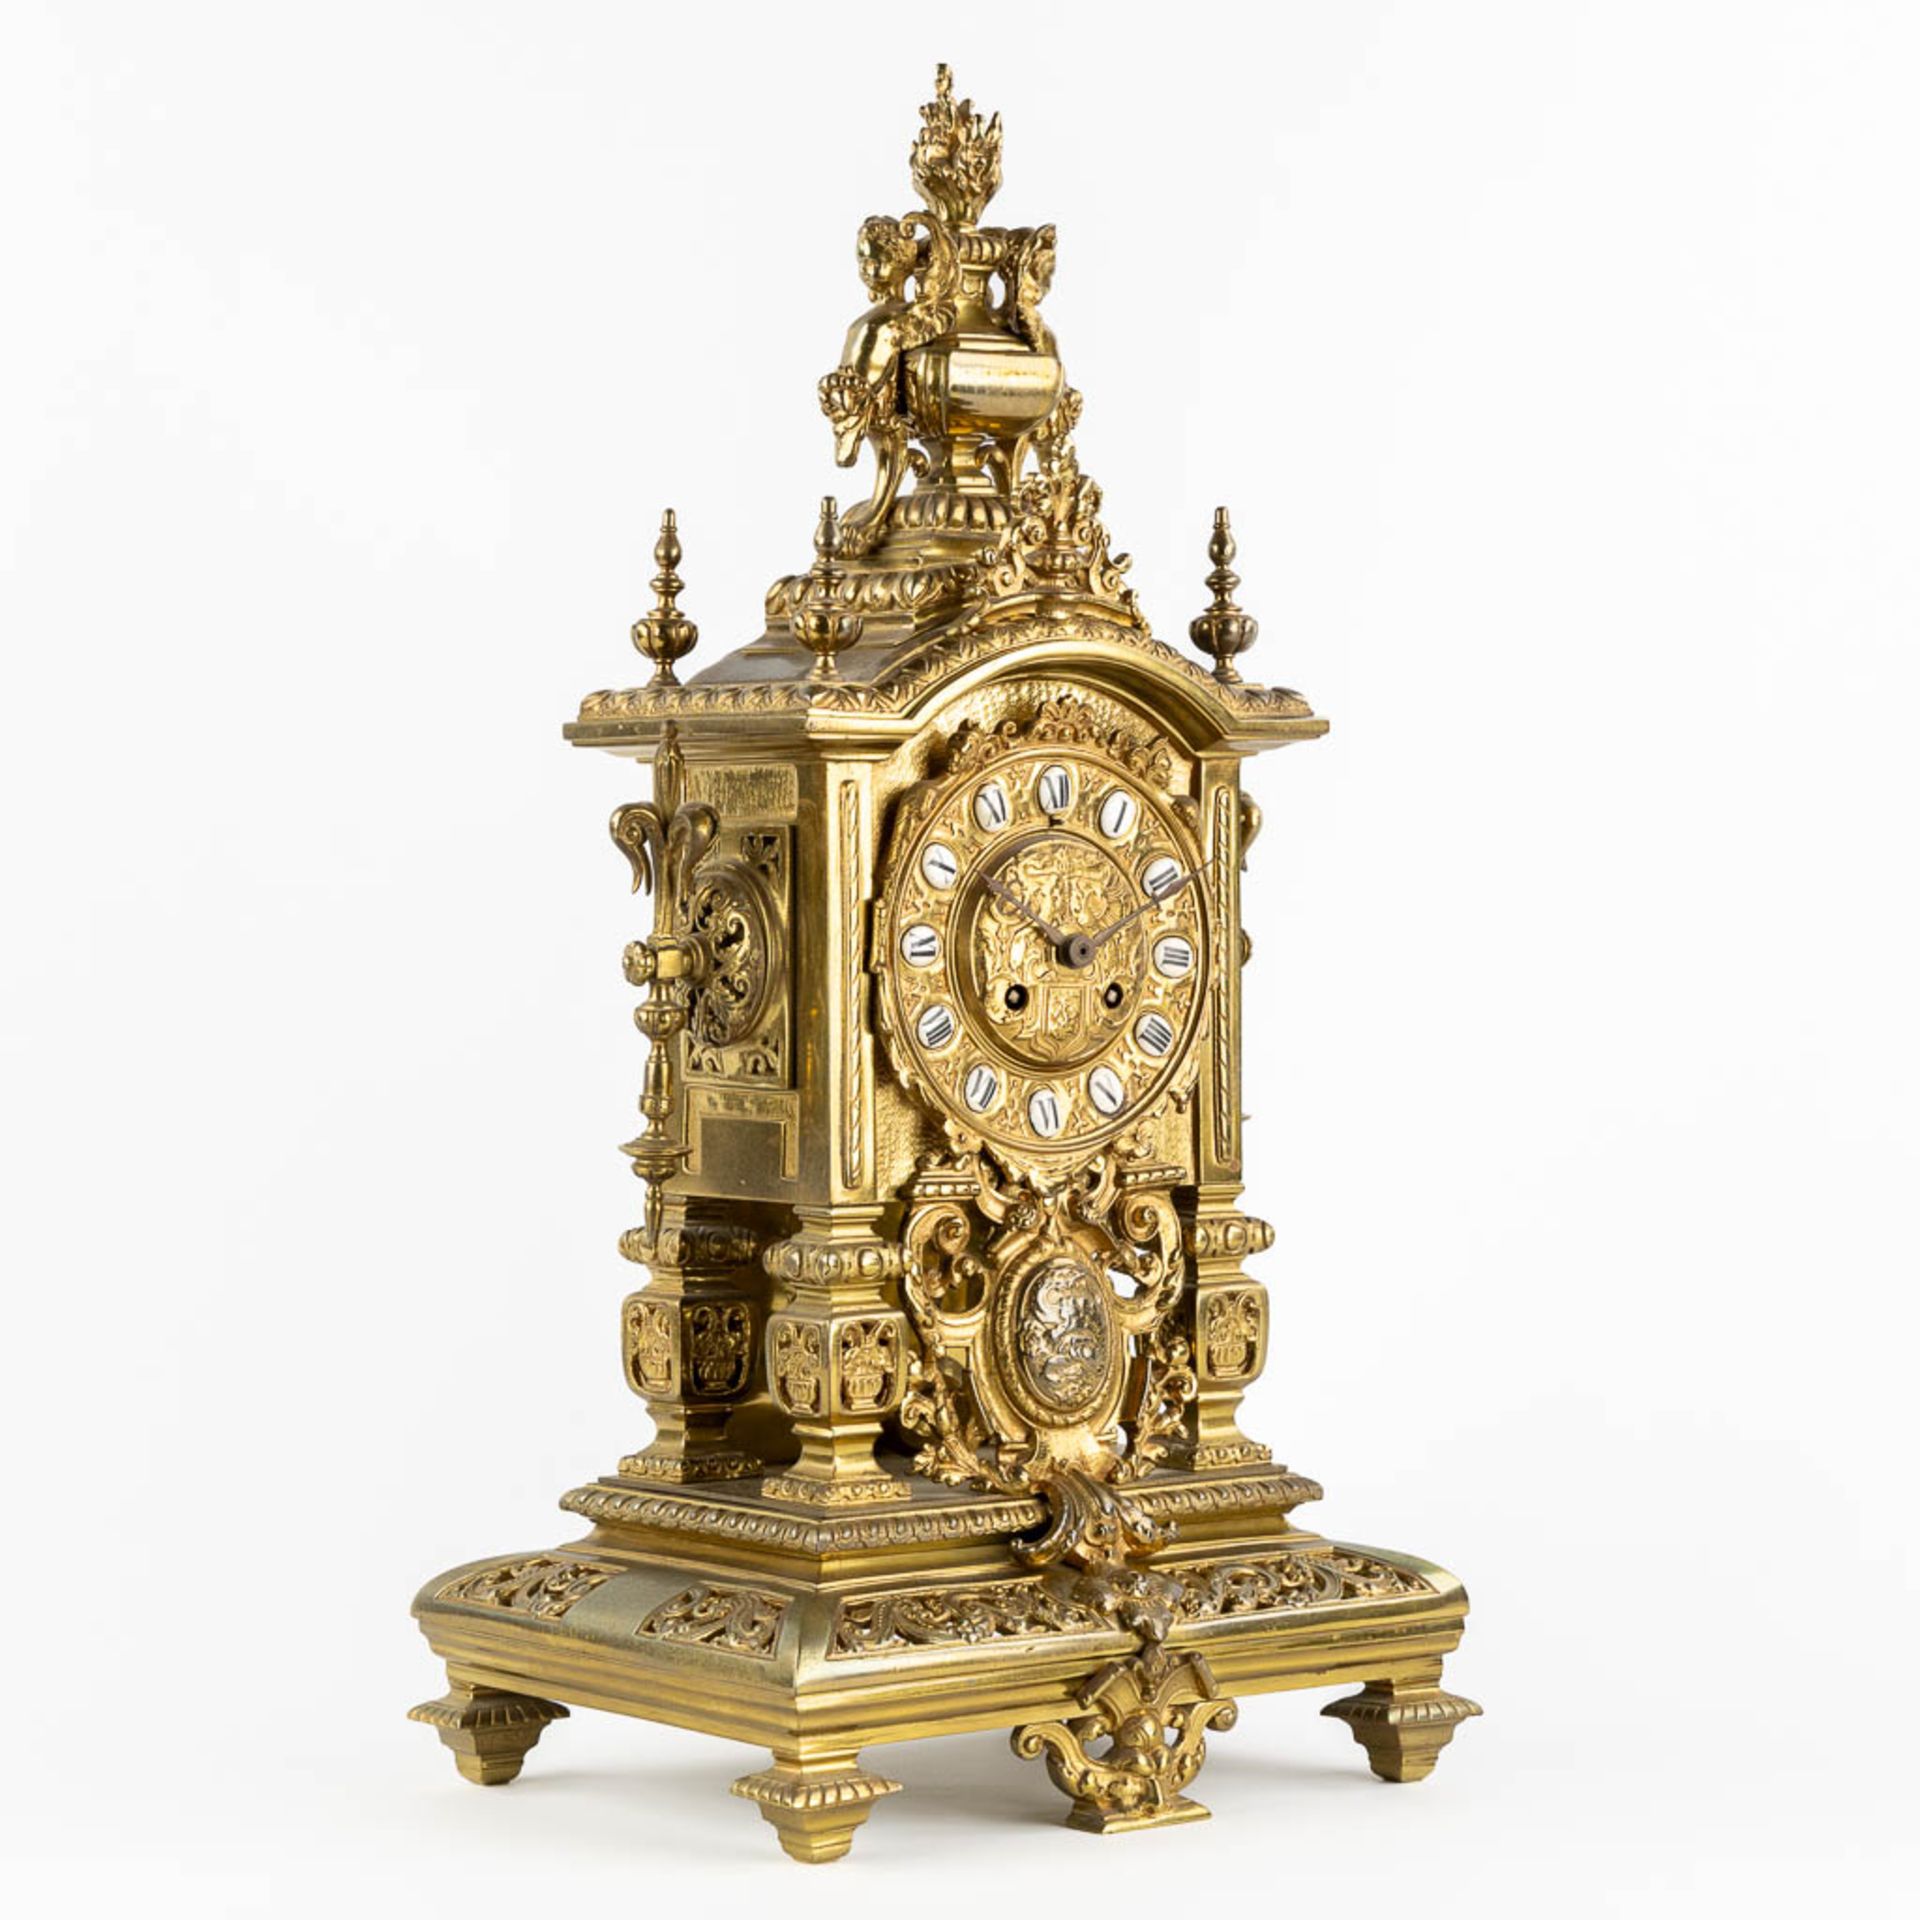 A mantle clock, bronze decorated with angels. Circa 1900. (L:21 x W:27 x H:54 cm) - Image 3 of 13